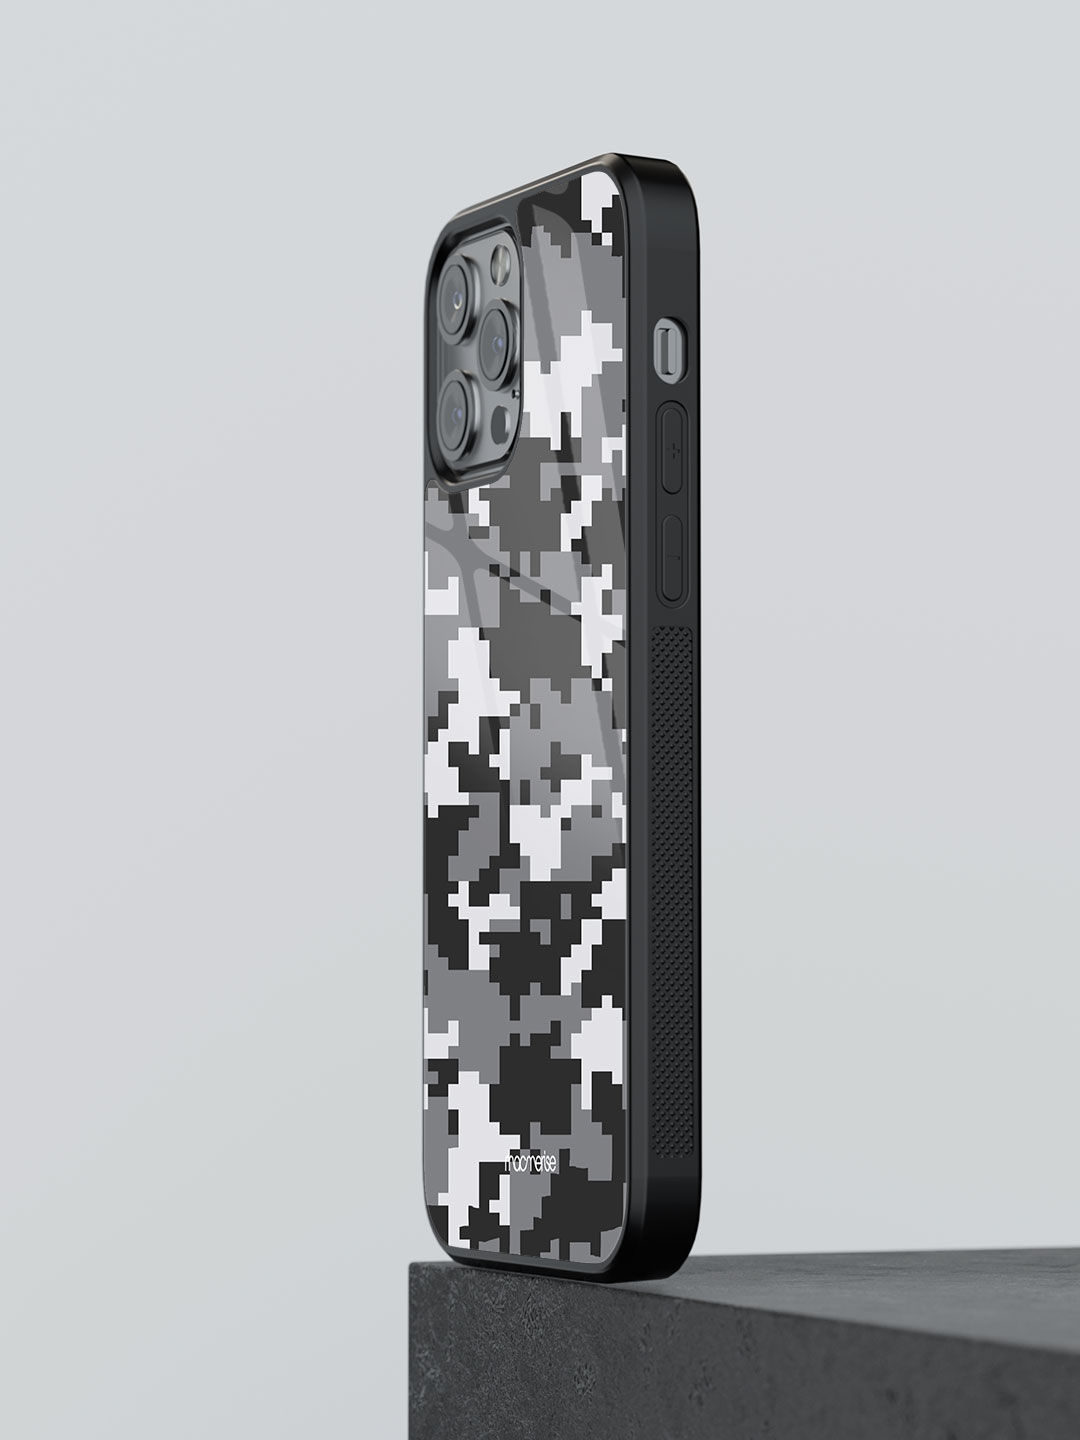 Camo Pixel Ash Grey - Glass Case For iPhone 13 Pro Max